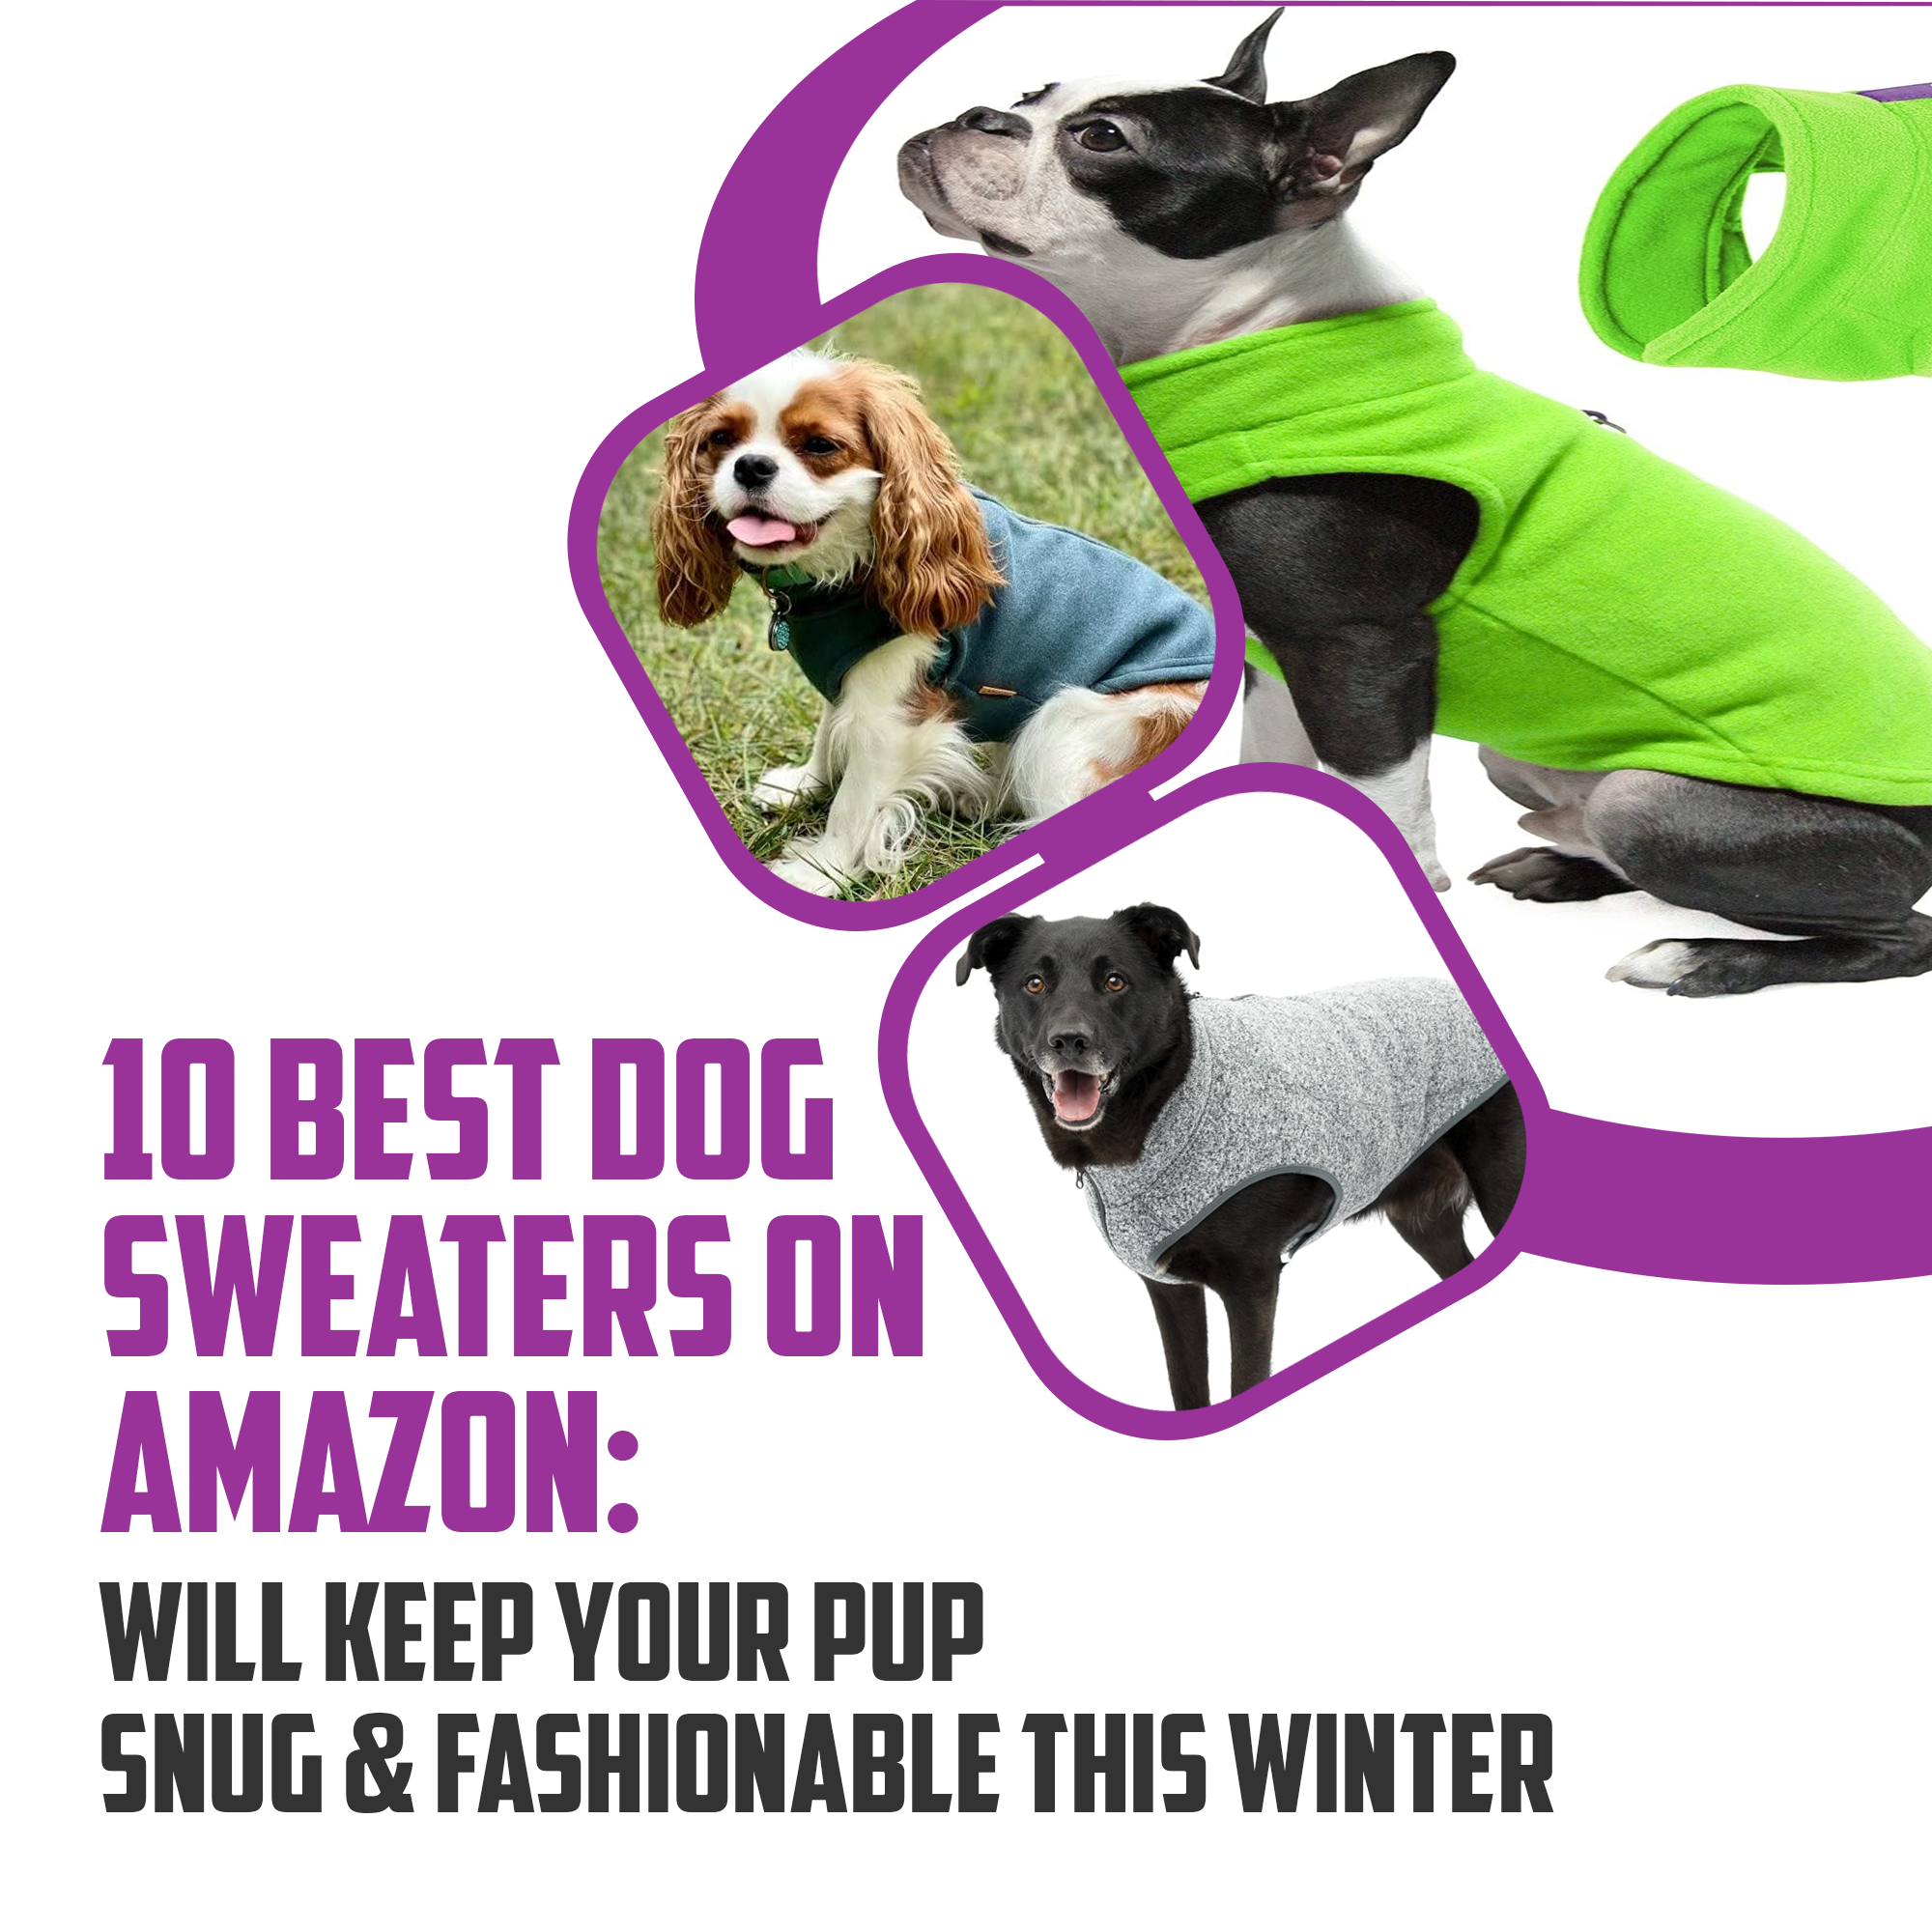 10 Best Dog Sweaters On Amazon: Will Keep Your Pup Snug & Fashionable This Winter